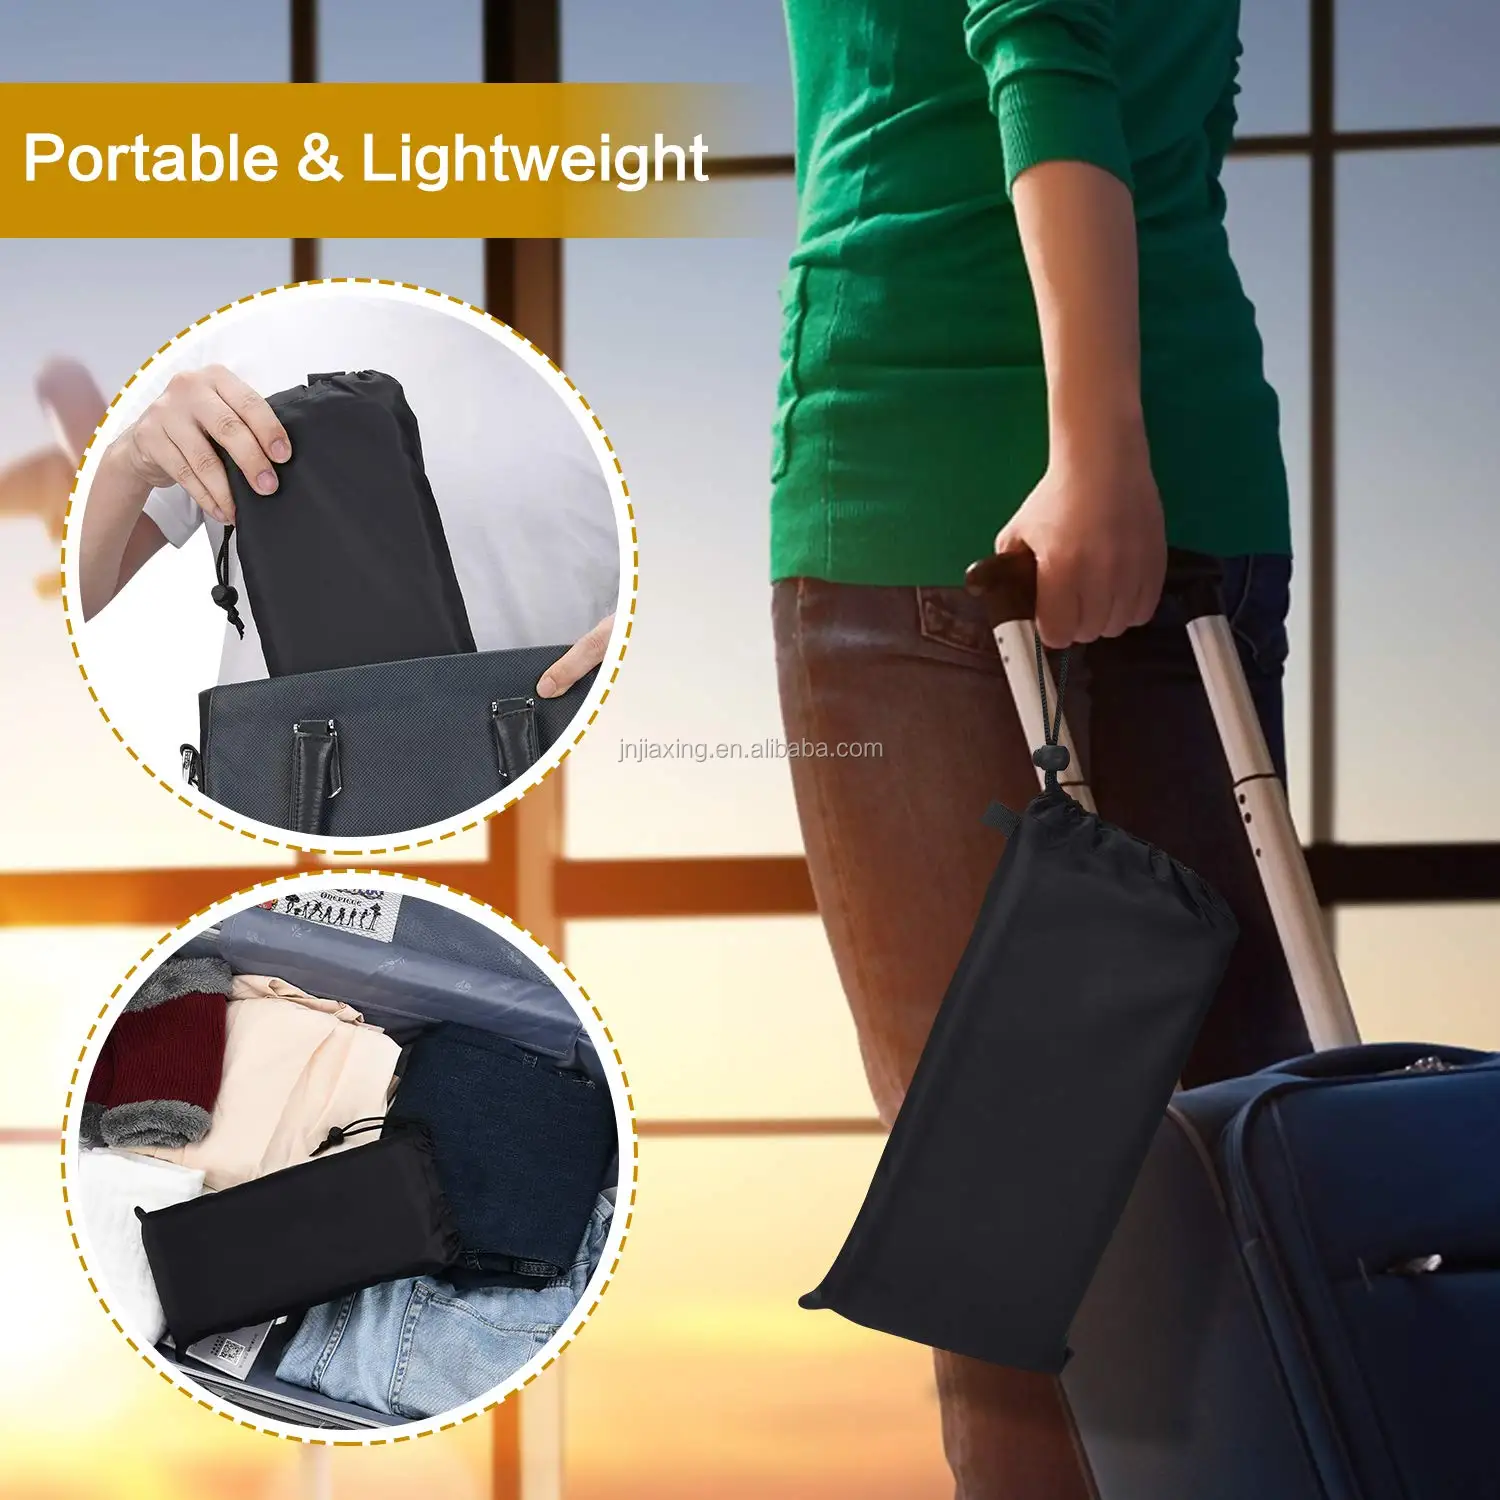 Arsaha Airplane Footrest-Foot Hammock-Airplane Travel Accessories-Portable Travel Foot Hammock for Train Bus Flight Office Footrest Sling Comfy Hanger Airplane Feet with Memory Foam-Reduce Swelling 